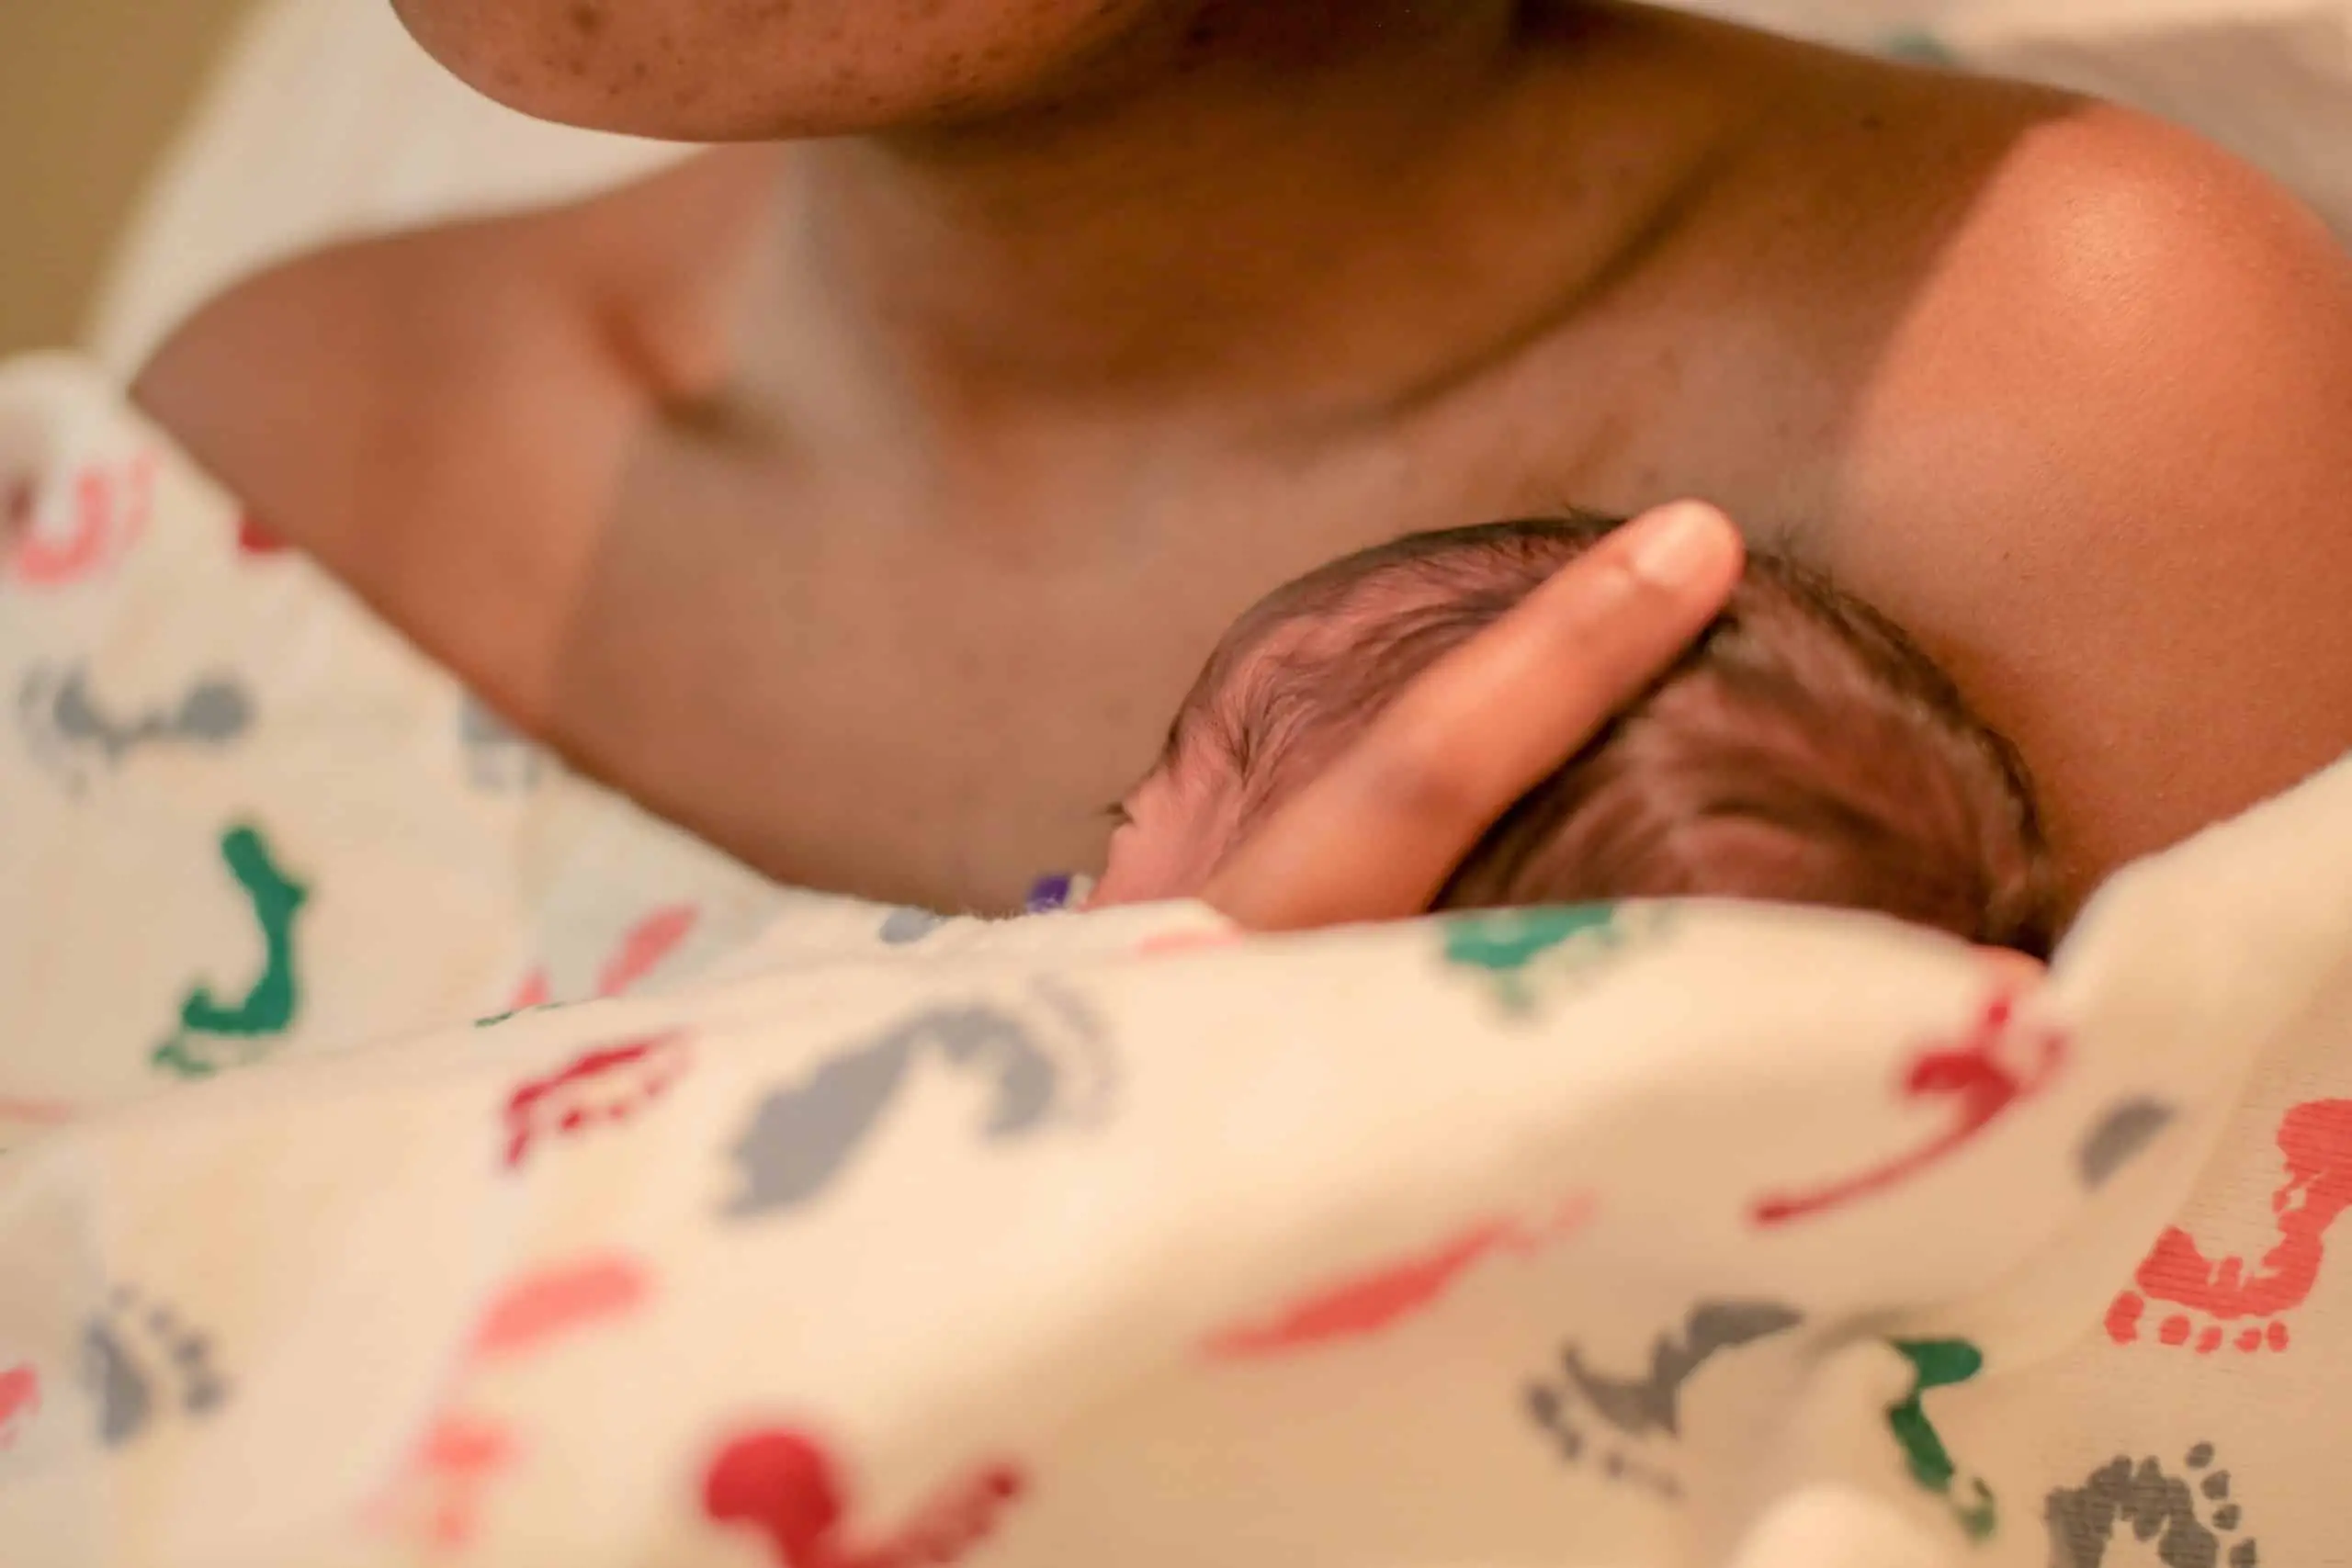 a positive natural birth story for moms to read